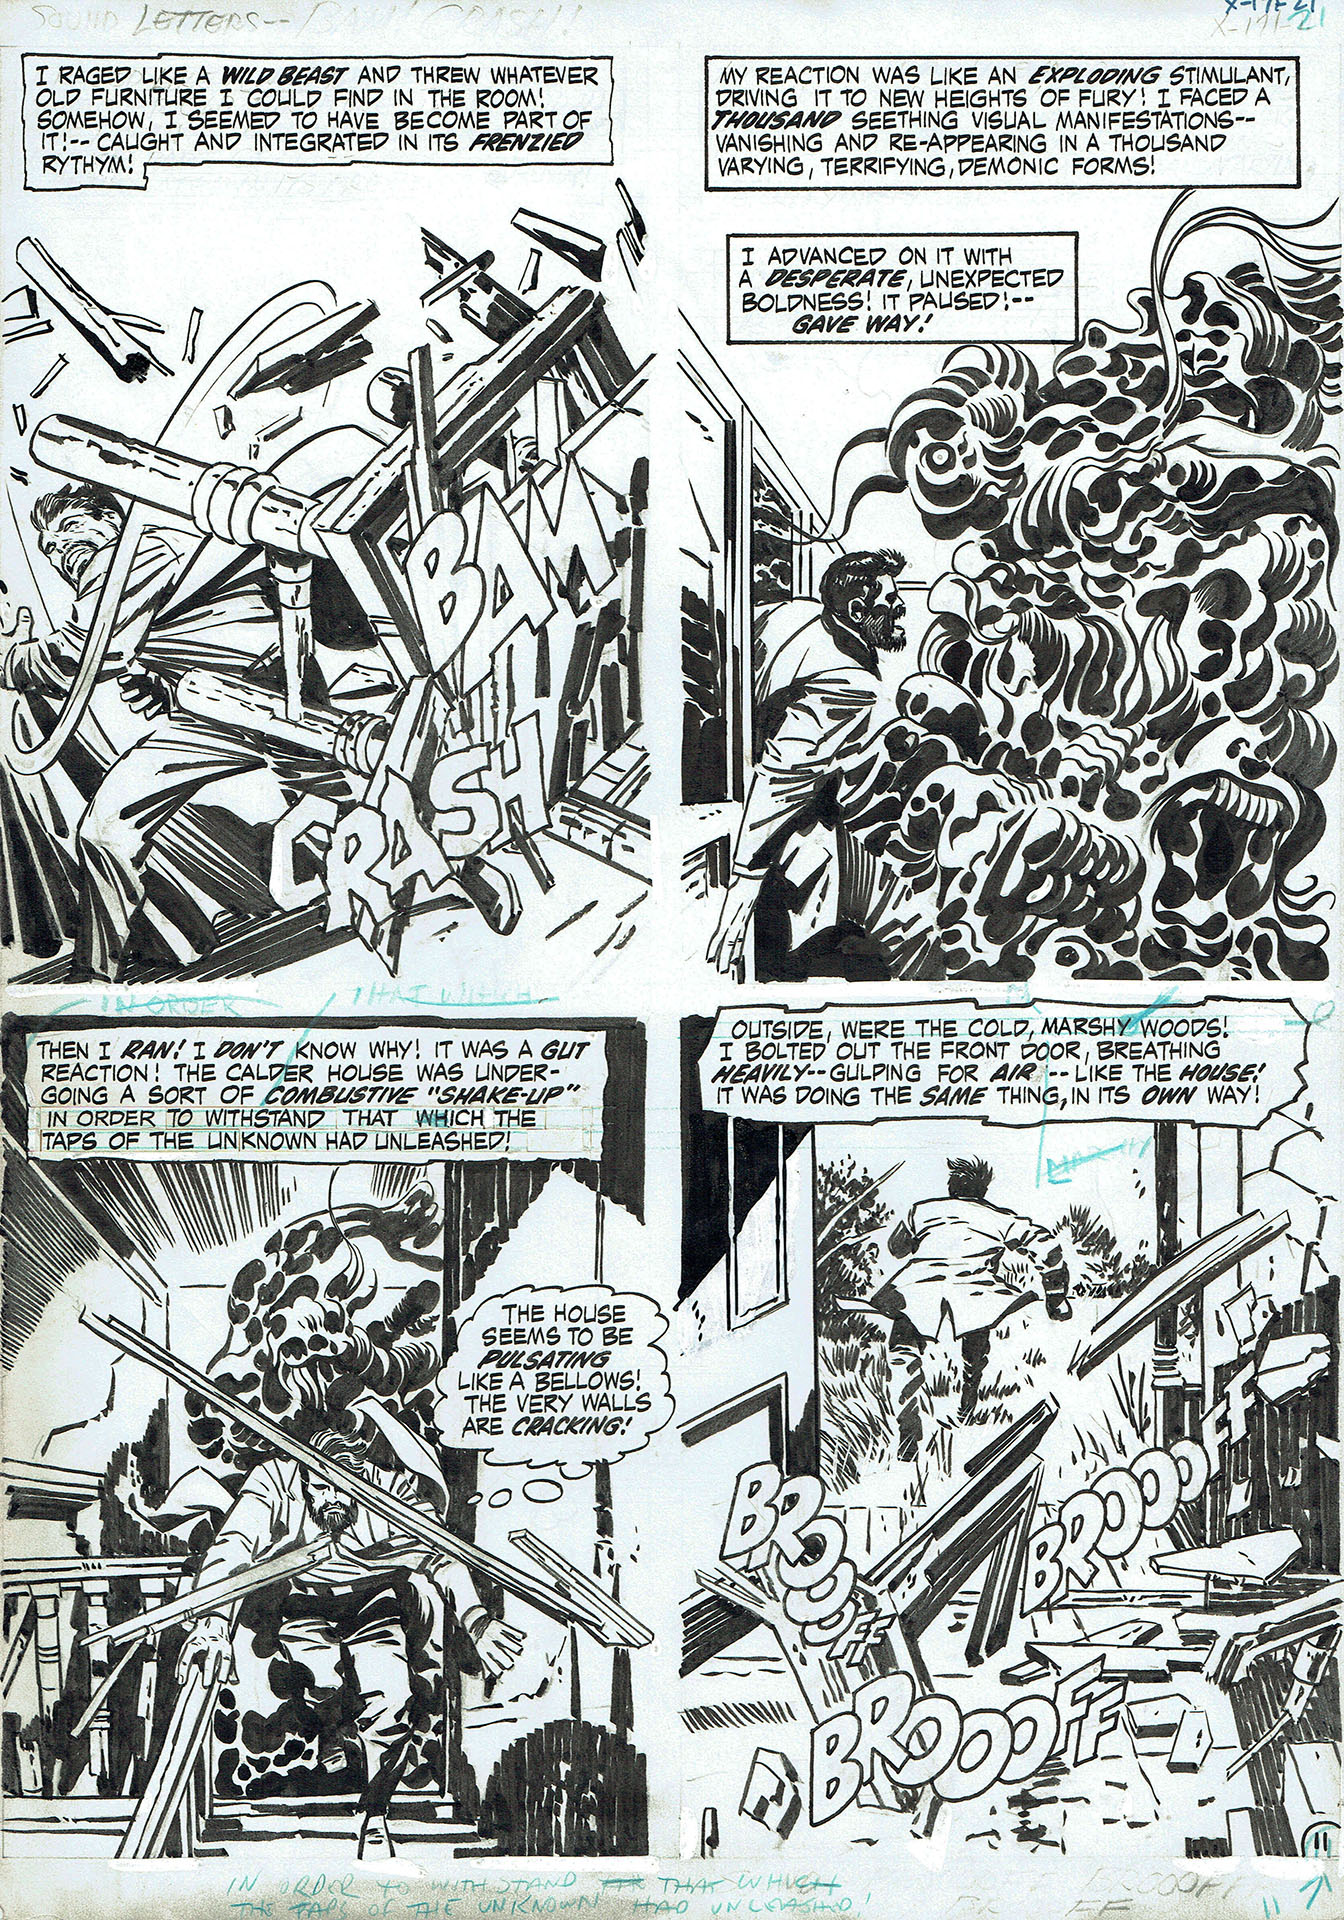 Jack KIRBY | Spirit World — Issue 1  - House of horrors — Page 11